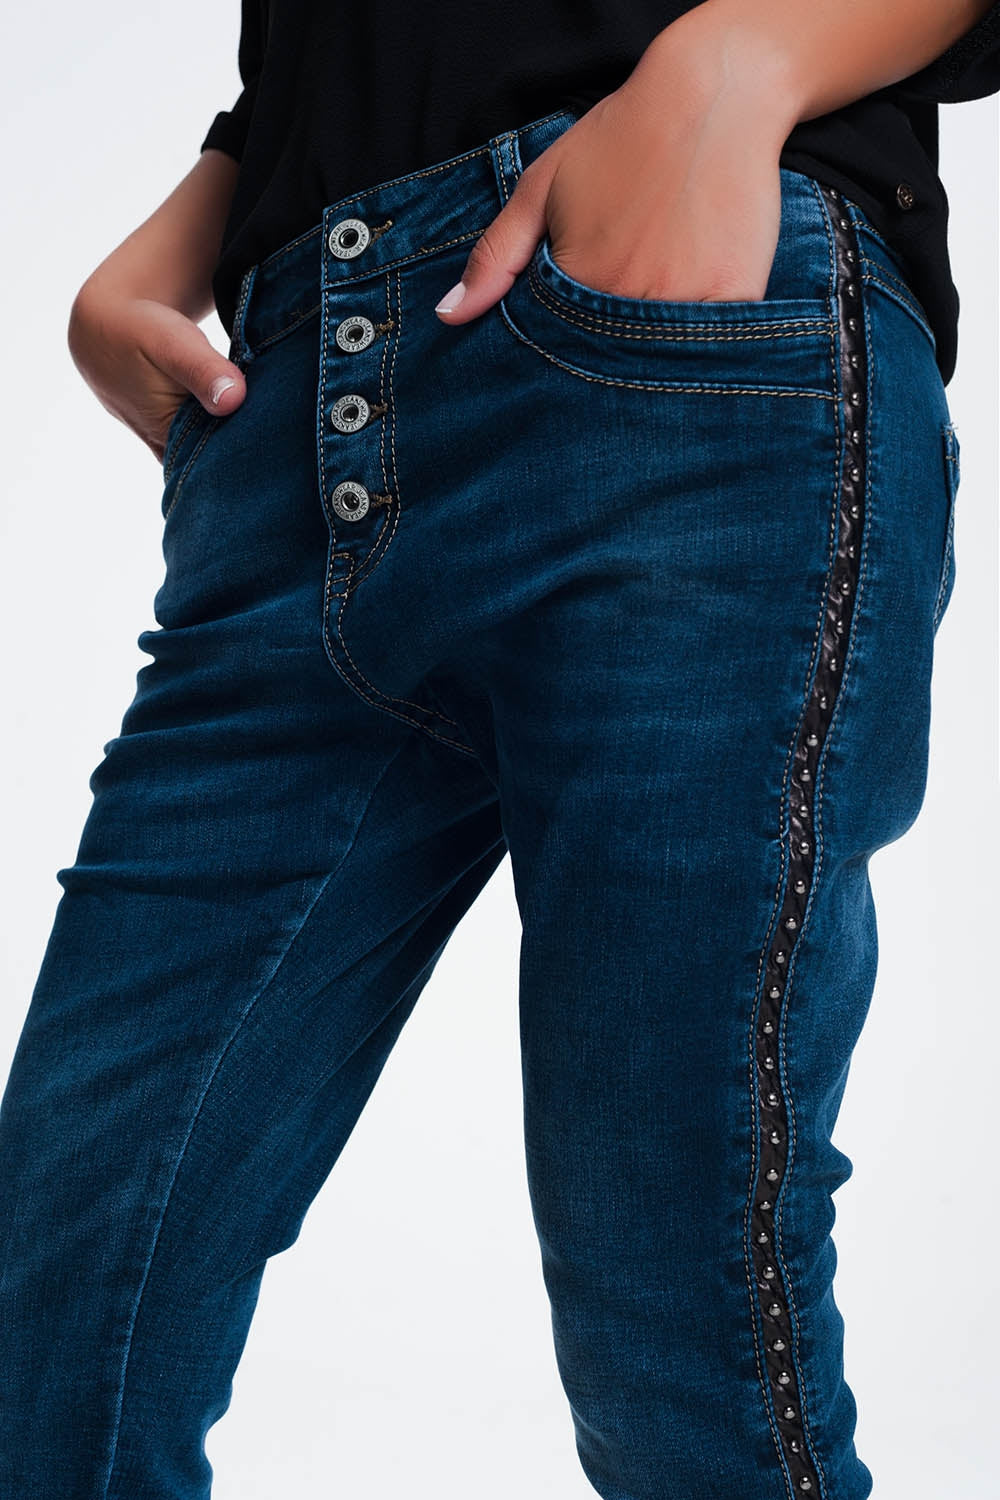 Q2 leather look studded Jeans